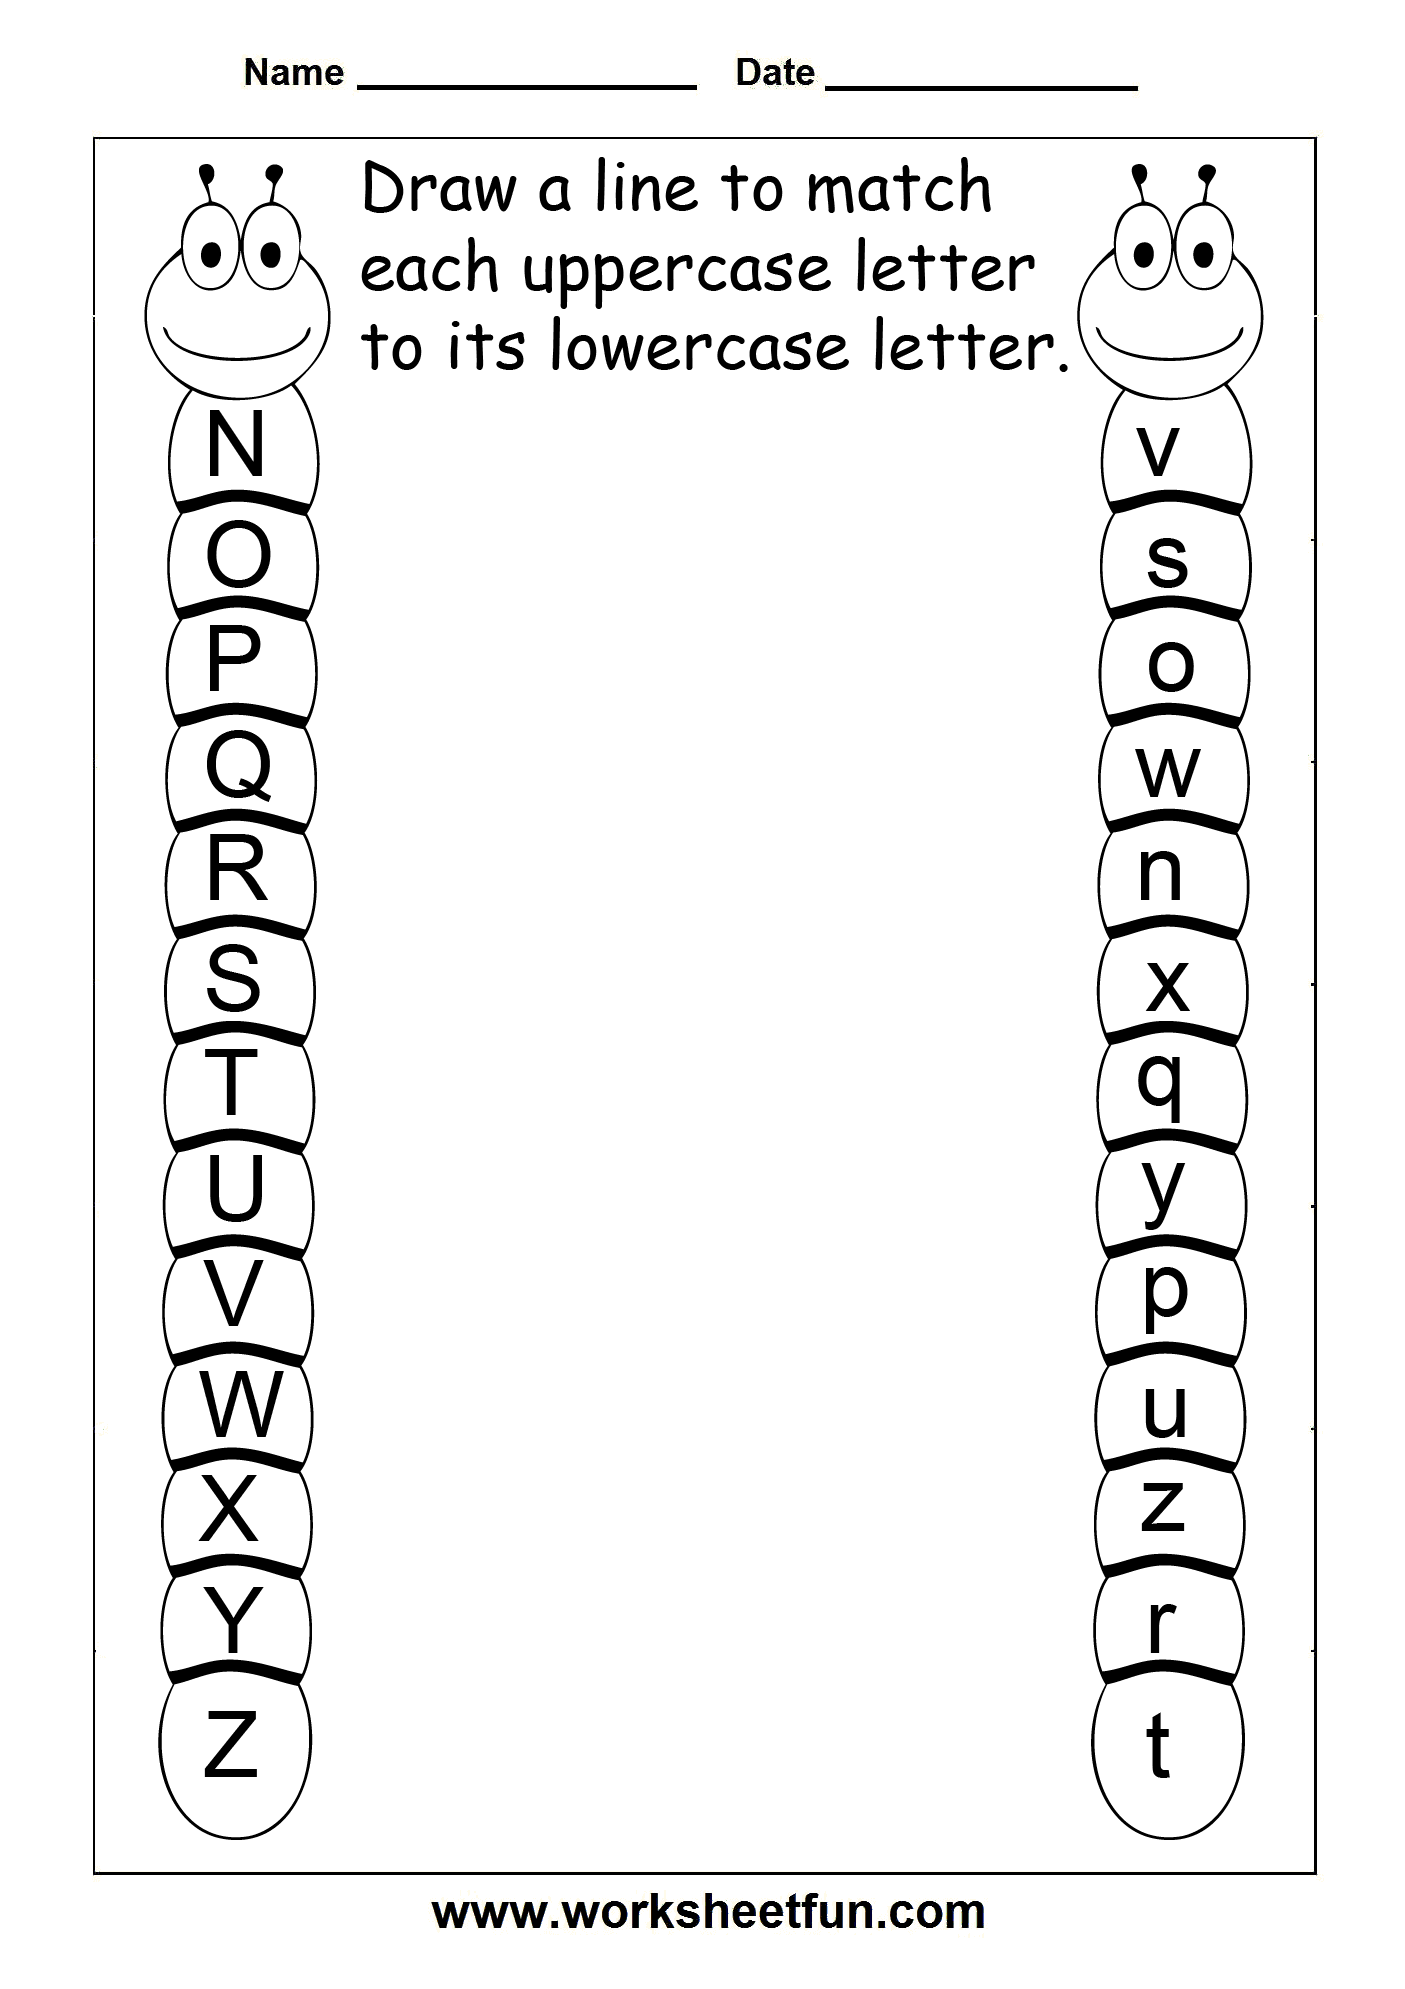 Match Uppercase And Lowercase Letters 11 Worksheets FREE Printable 